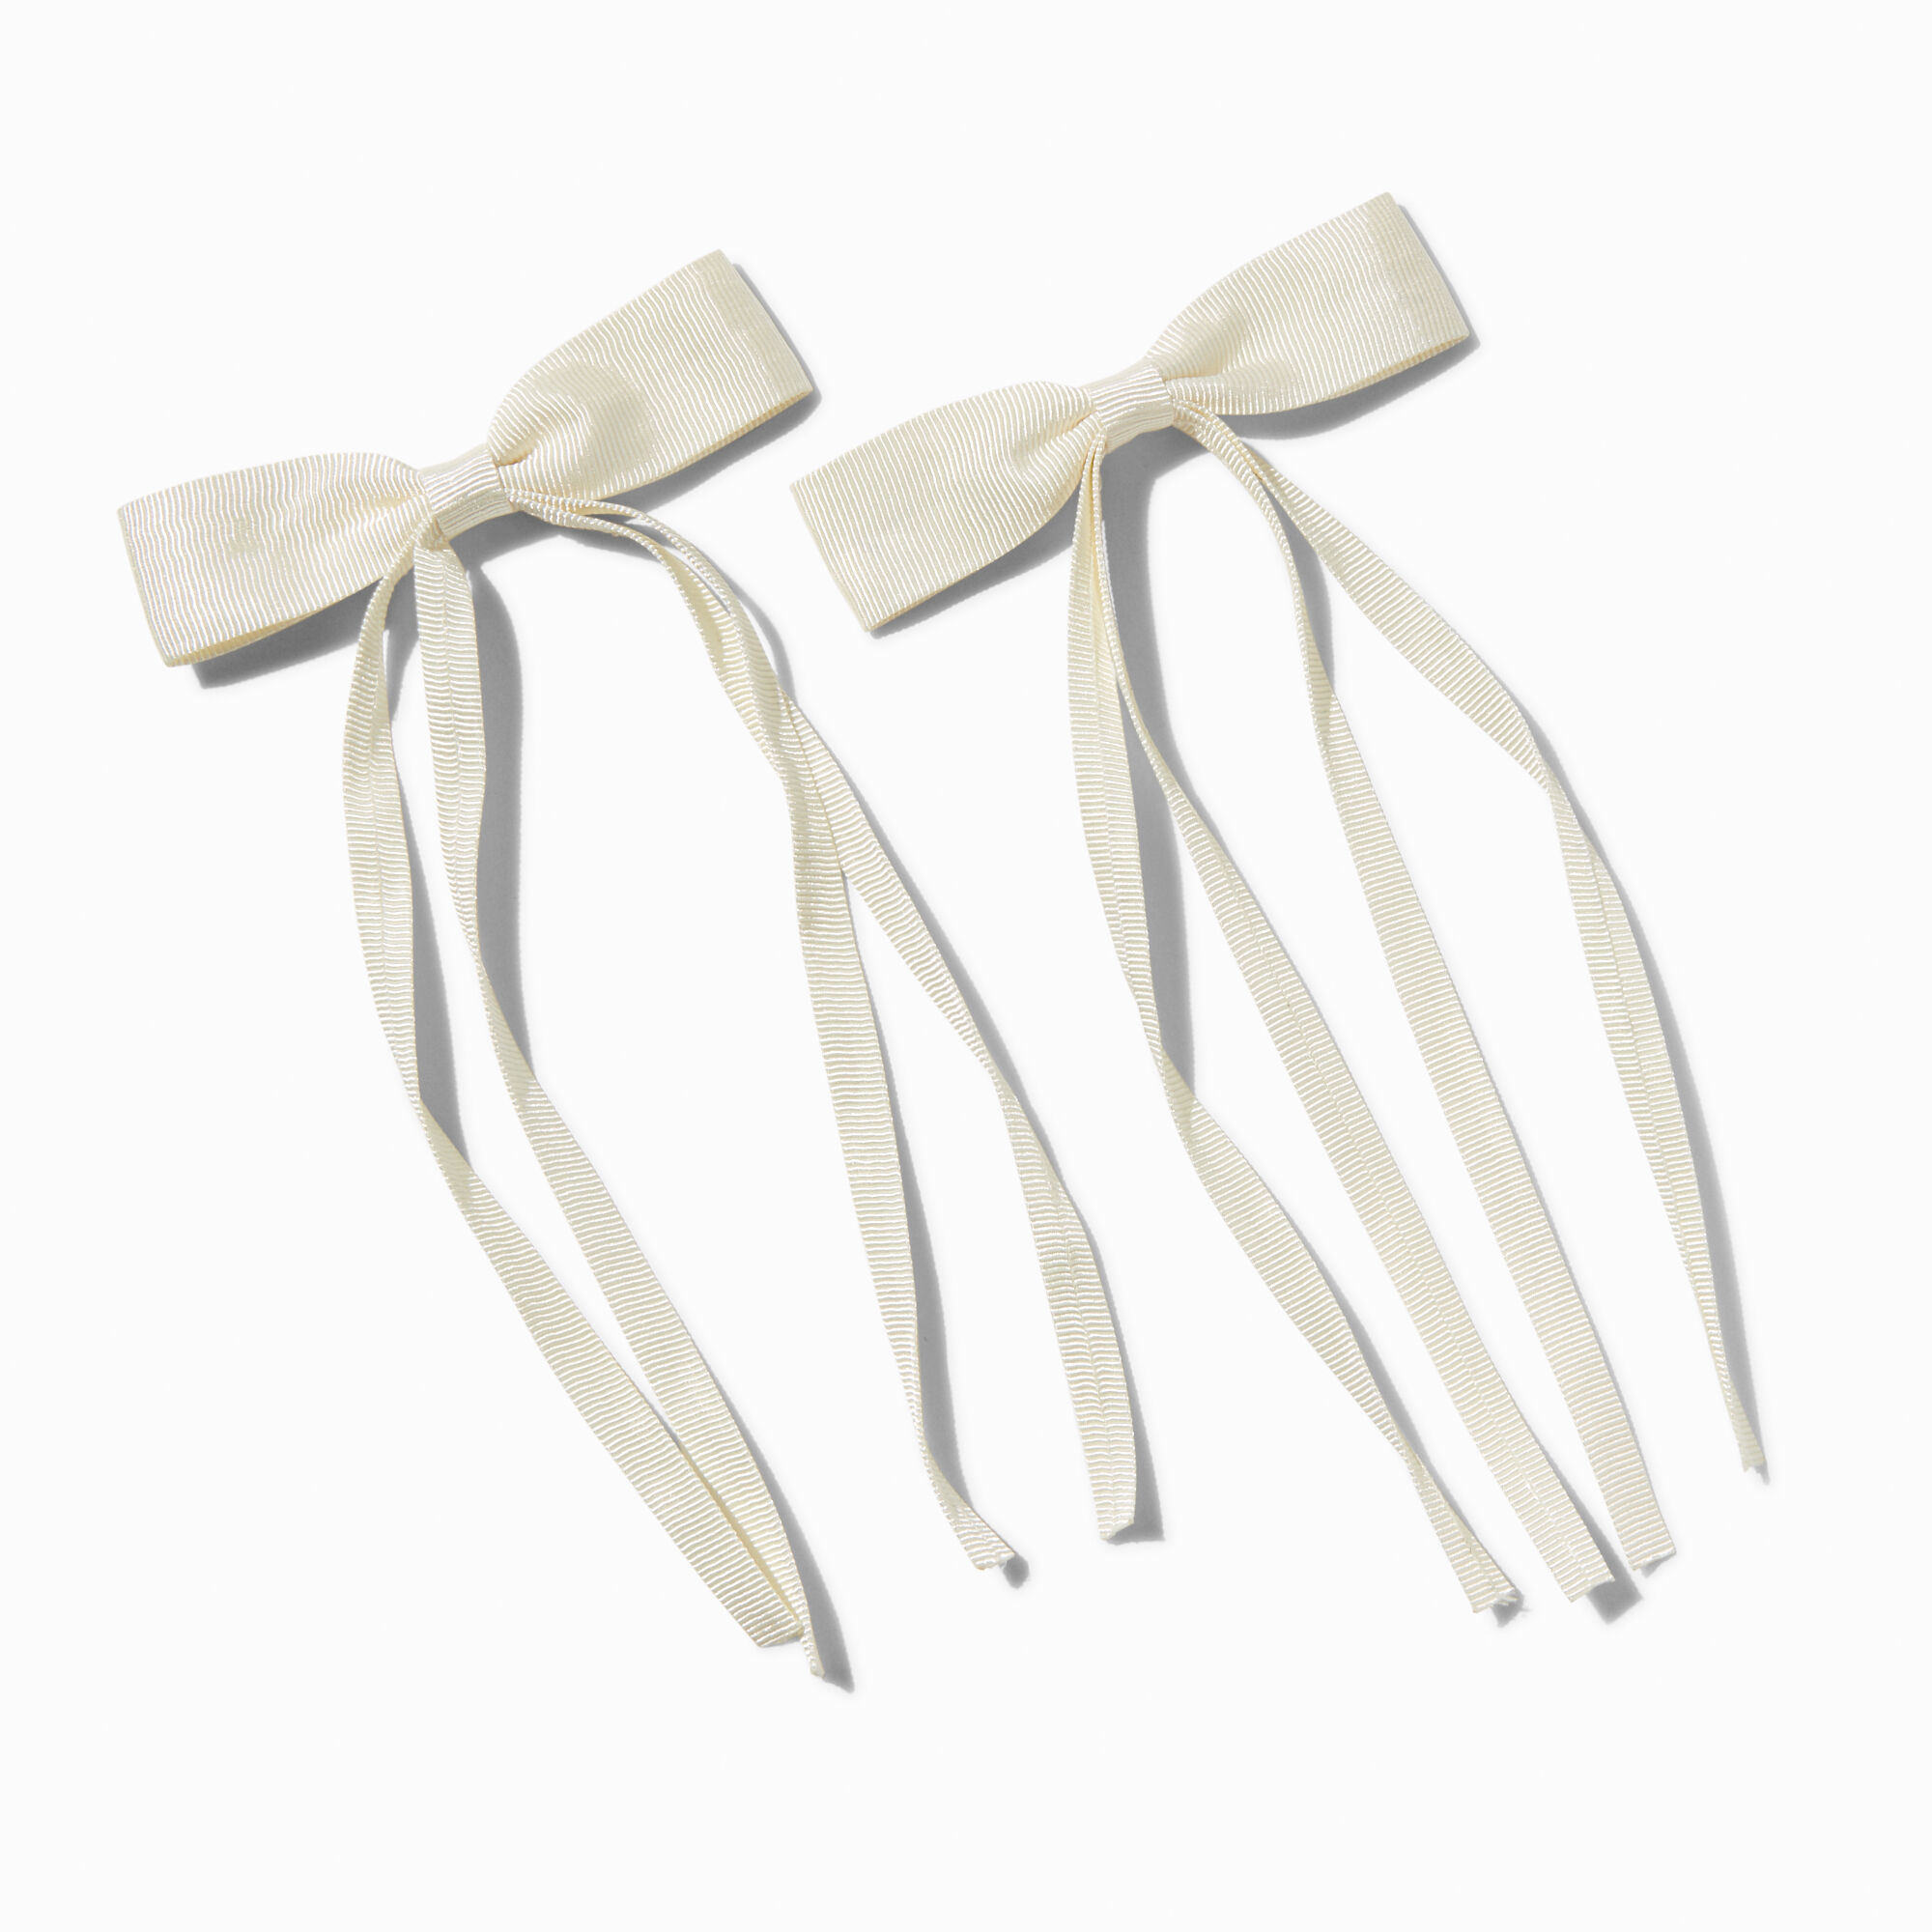 View Claires Grosgrain Ribbon Long Tail Hair Bow Clips 2 Pack Ivory information